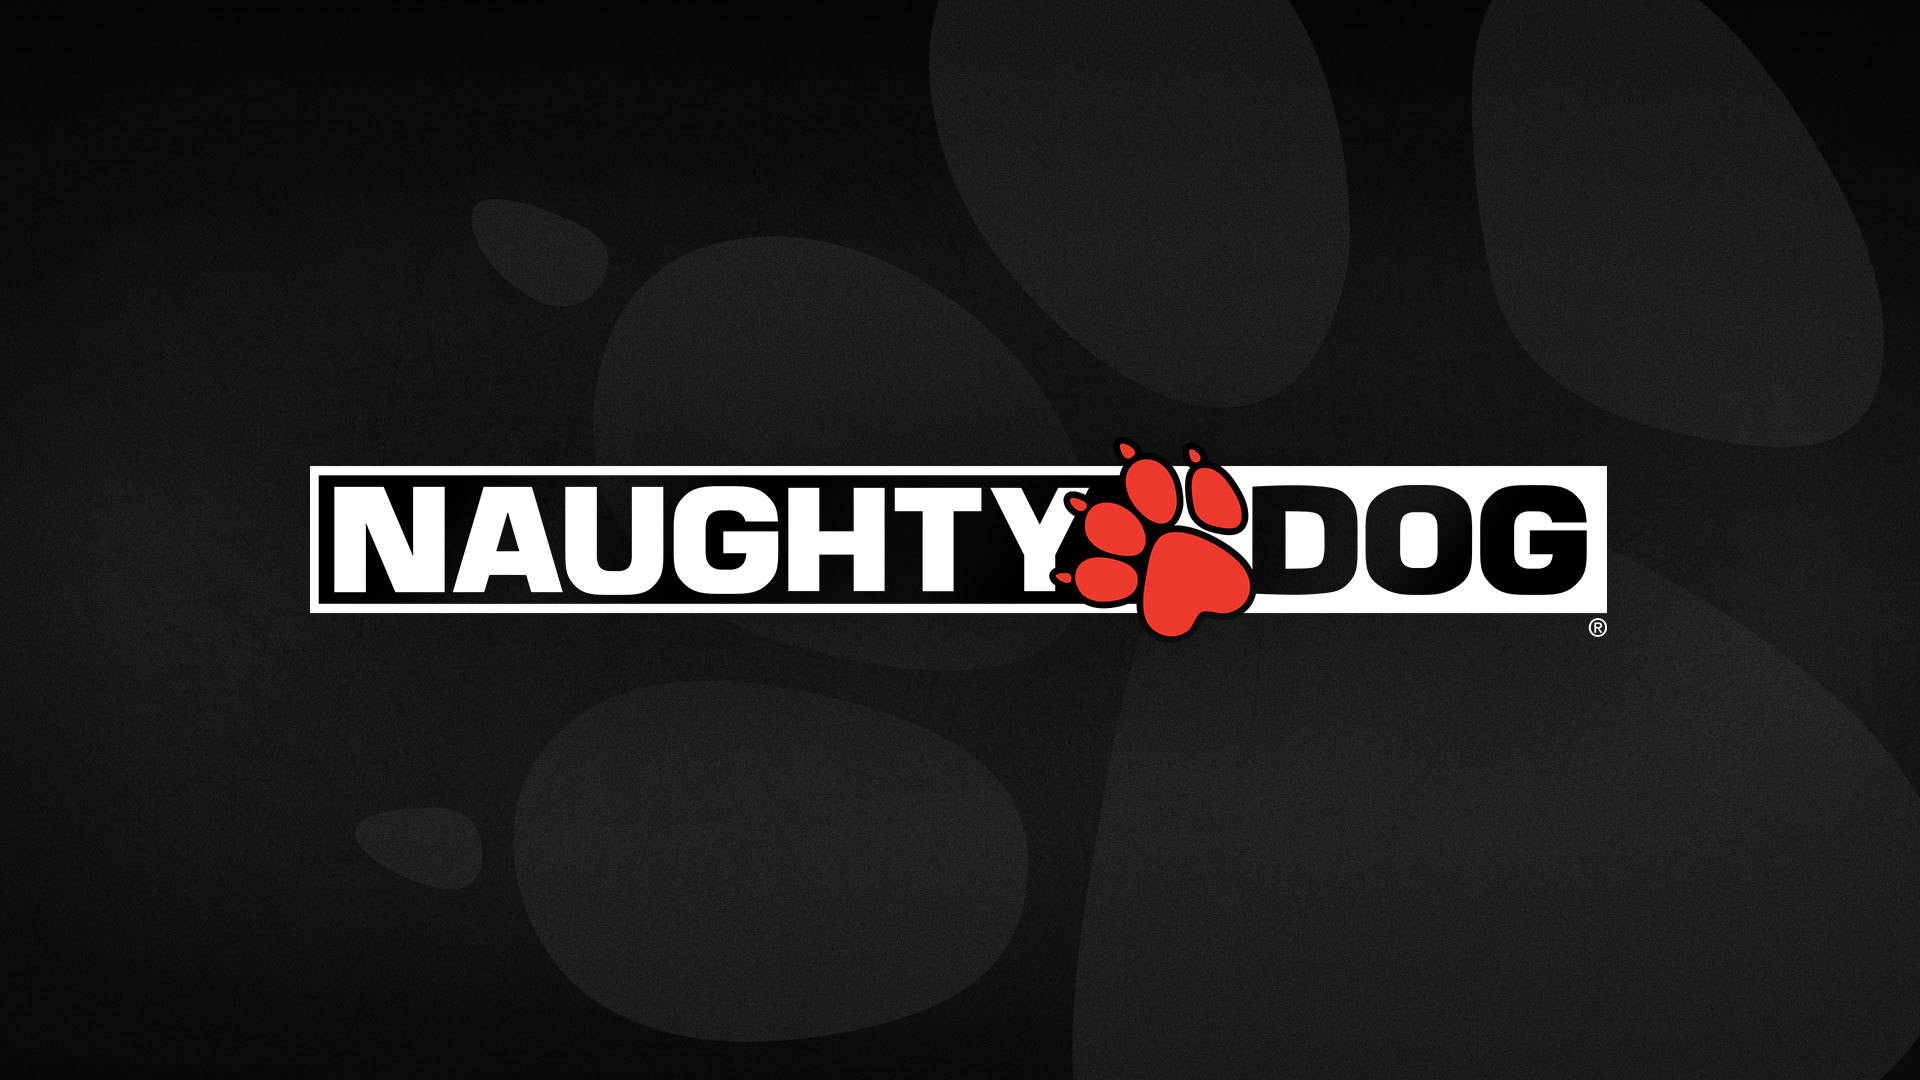 Neil Druckman, director of The Last of Us, is now the co-chair of Naughty Dog